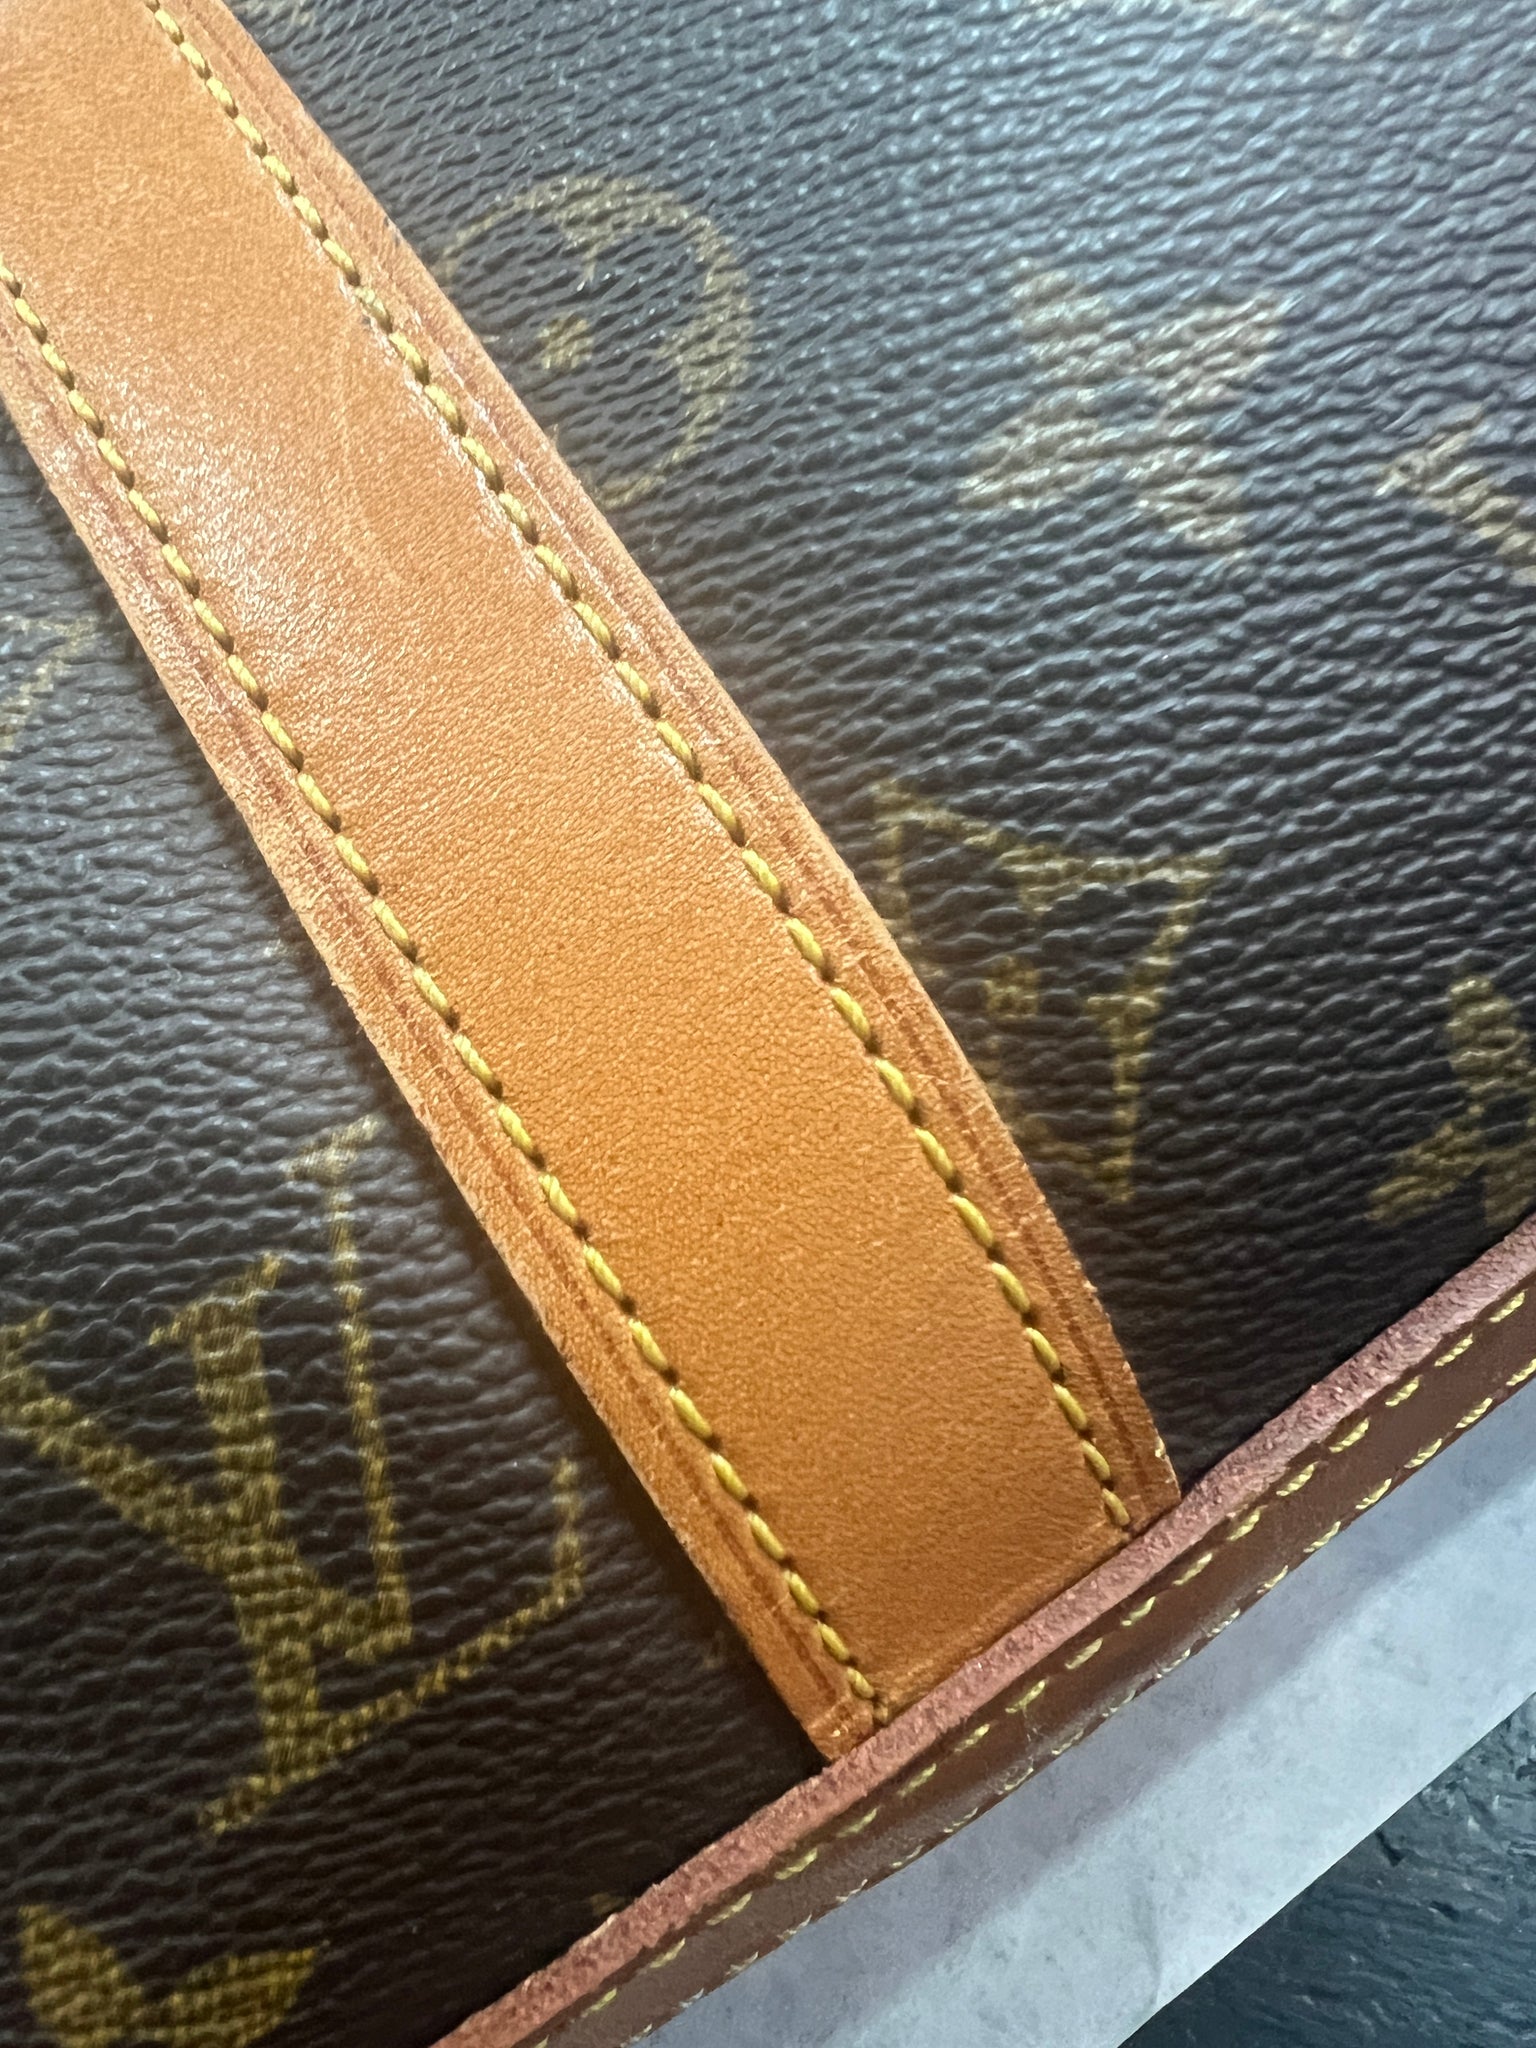 genuine leather louis vuitton bags